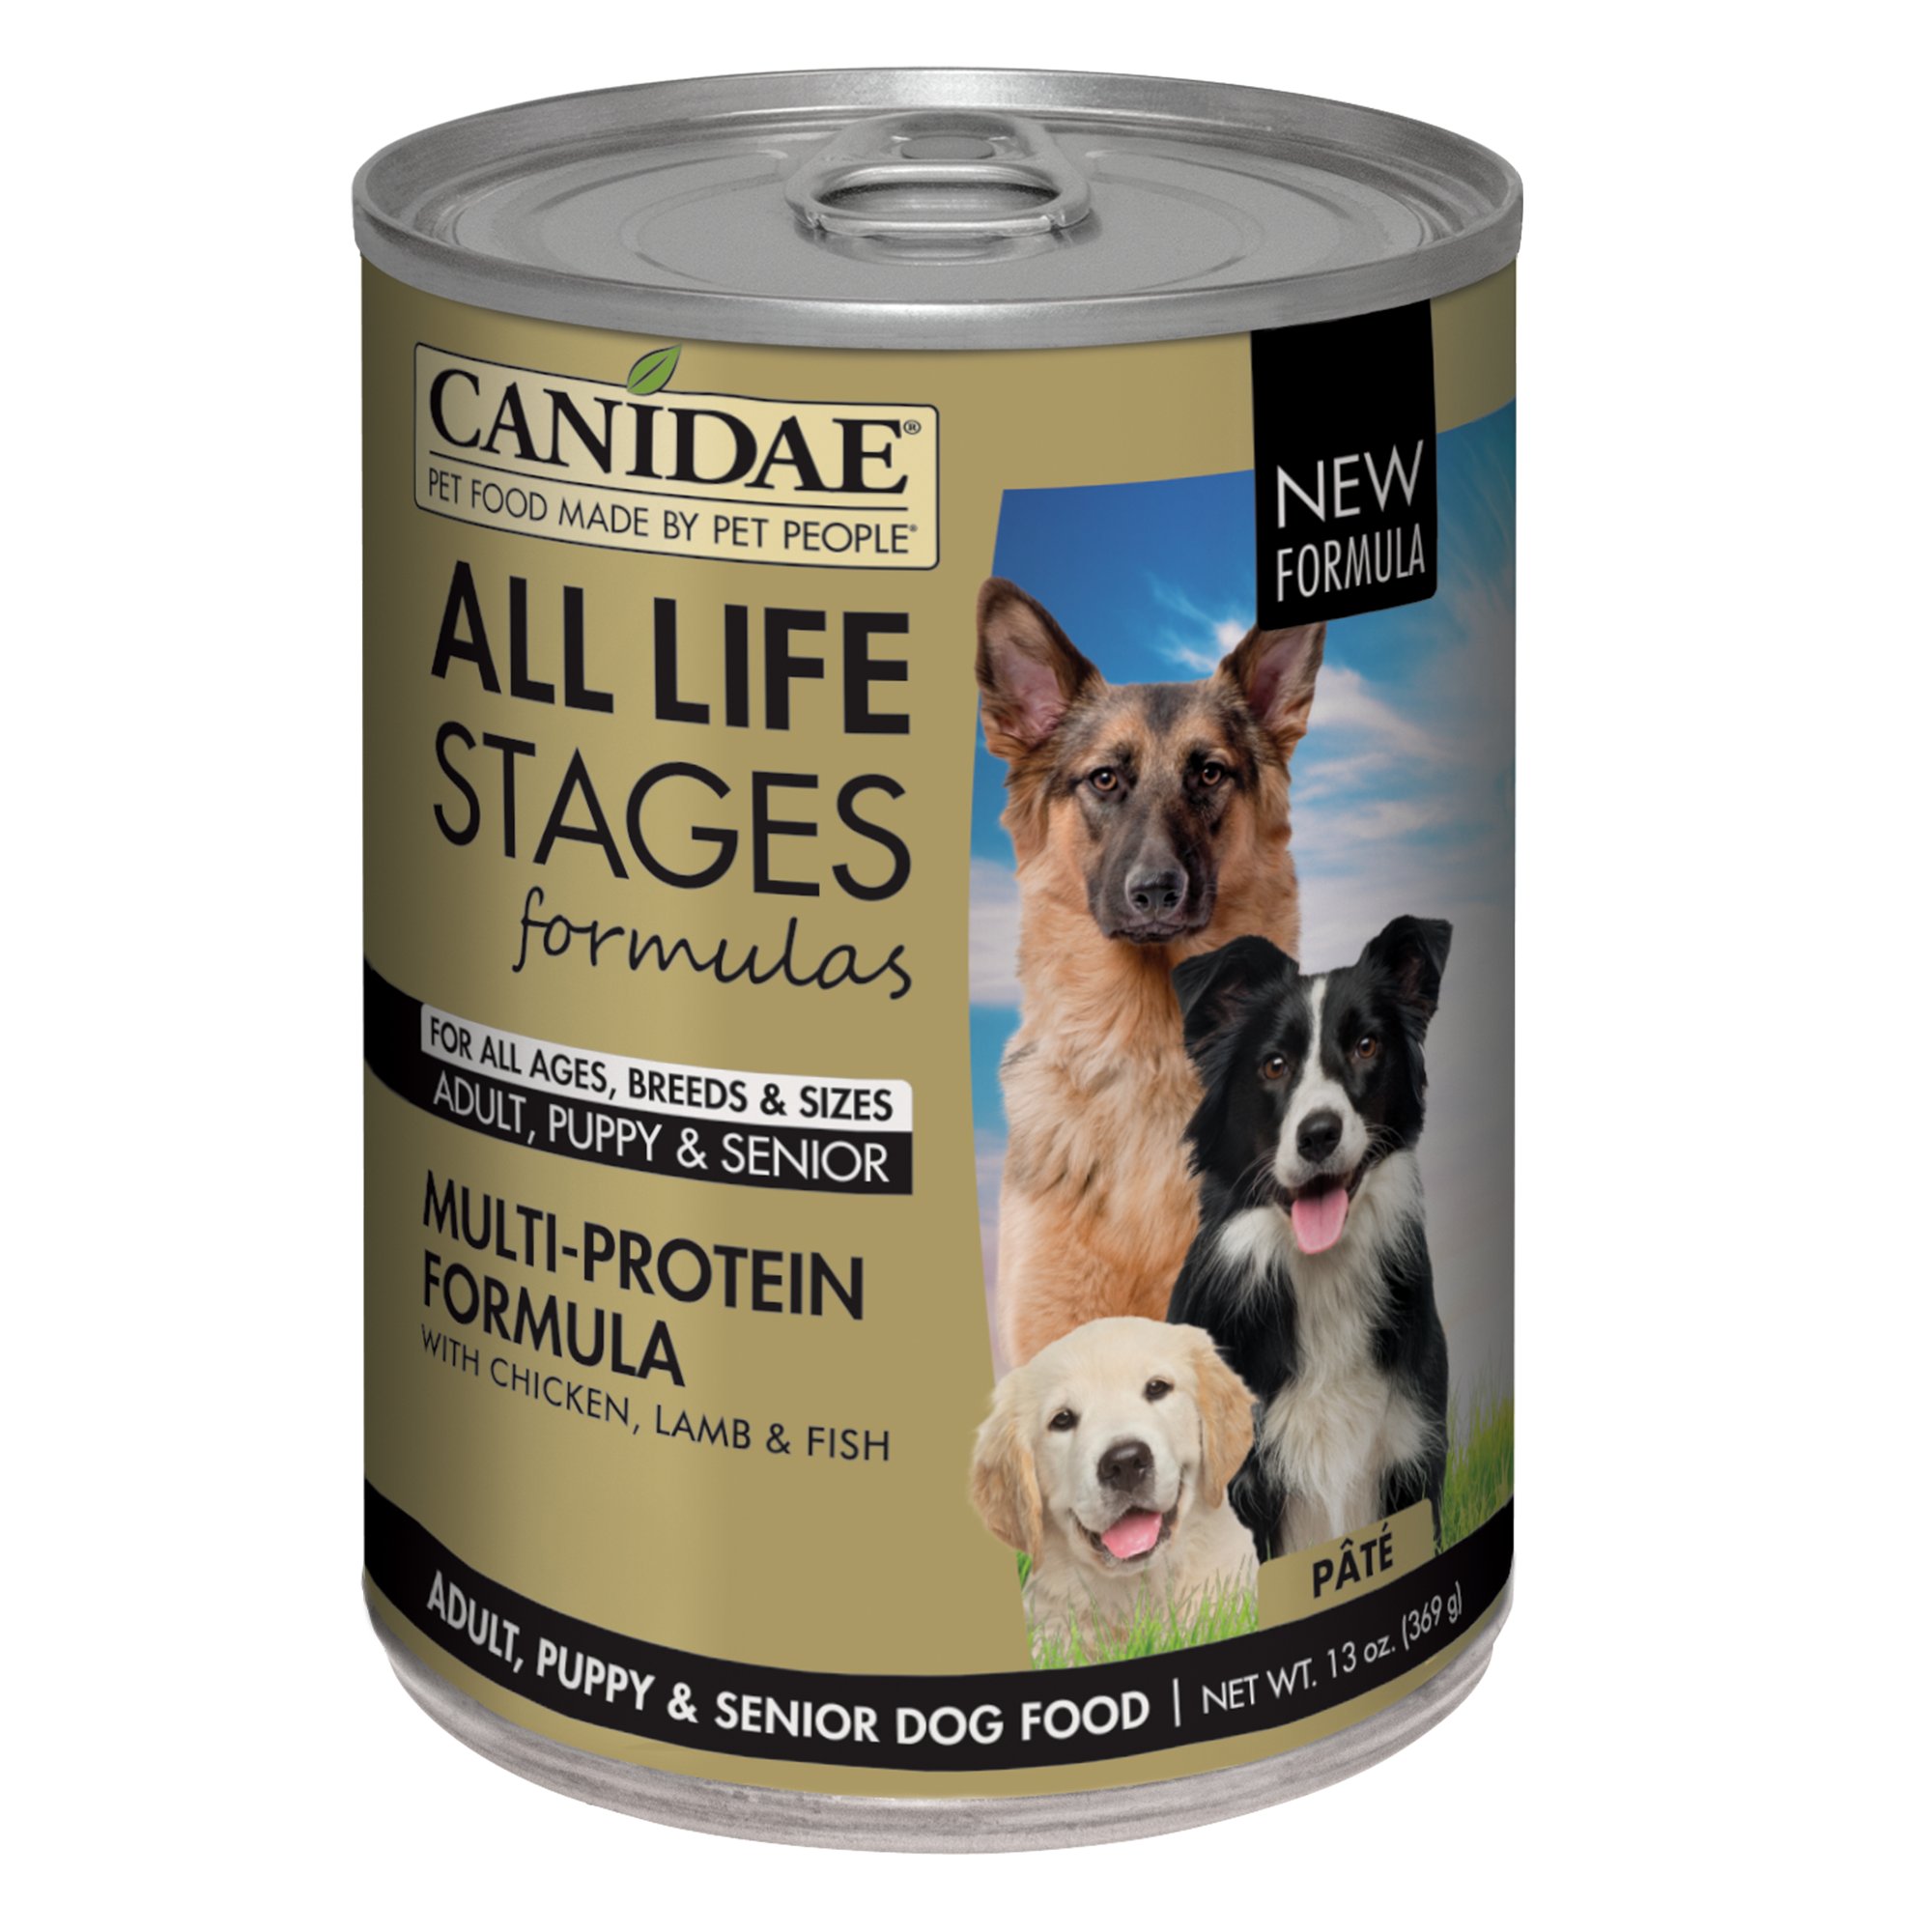 CANIDAE All Life Stages Chicken, Lamb & Fish Wet Dog Food